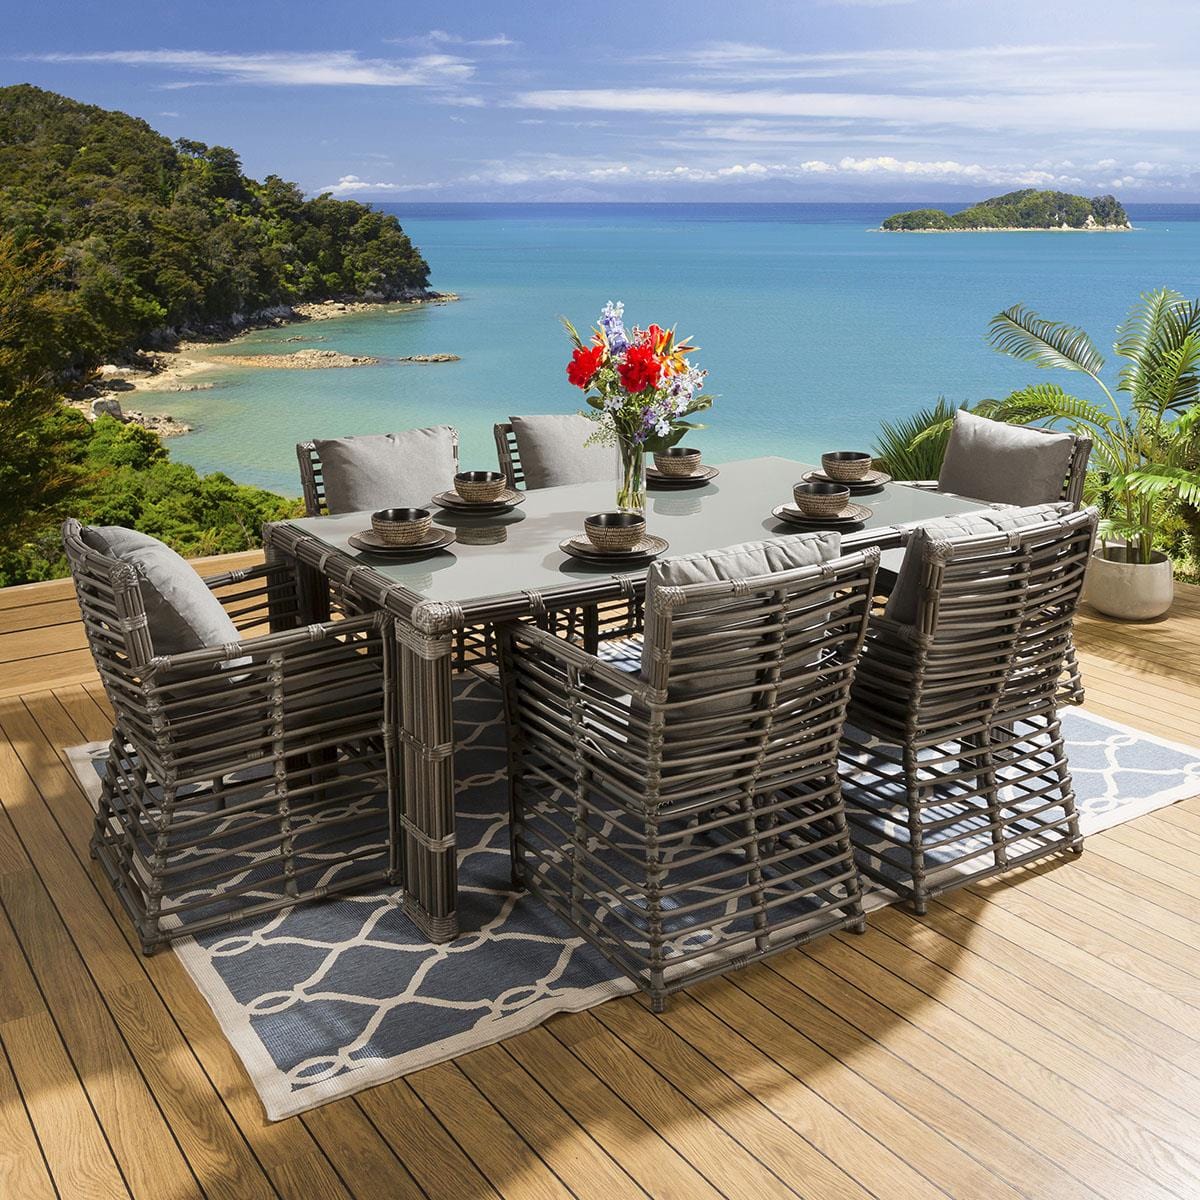 Quatropi Luxury Outdoor Garden Dining Set 6 chairs , Large Table Bamboo Style Grey Beach Club